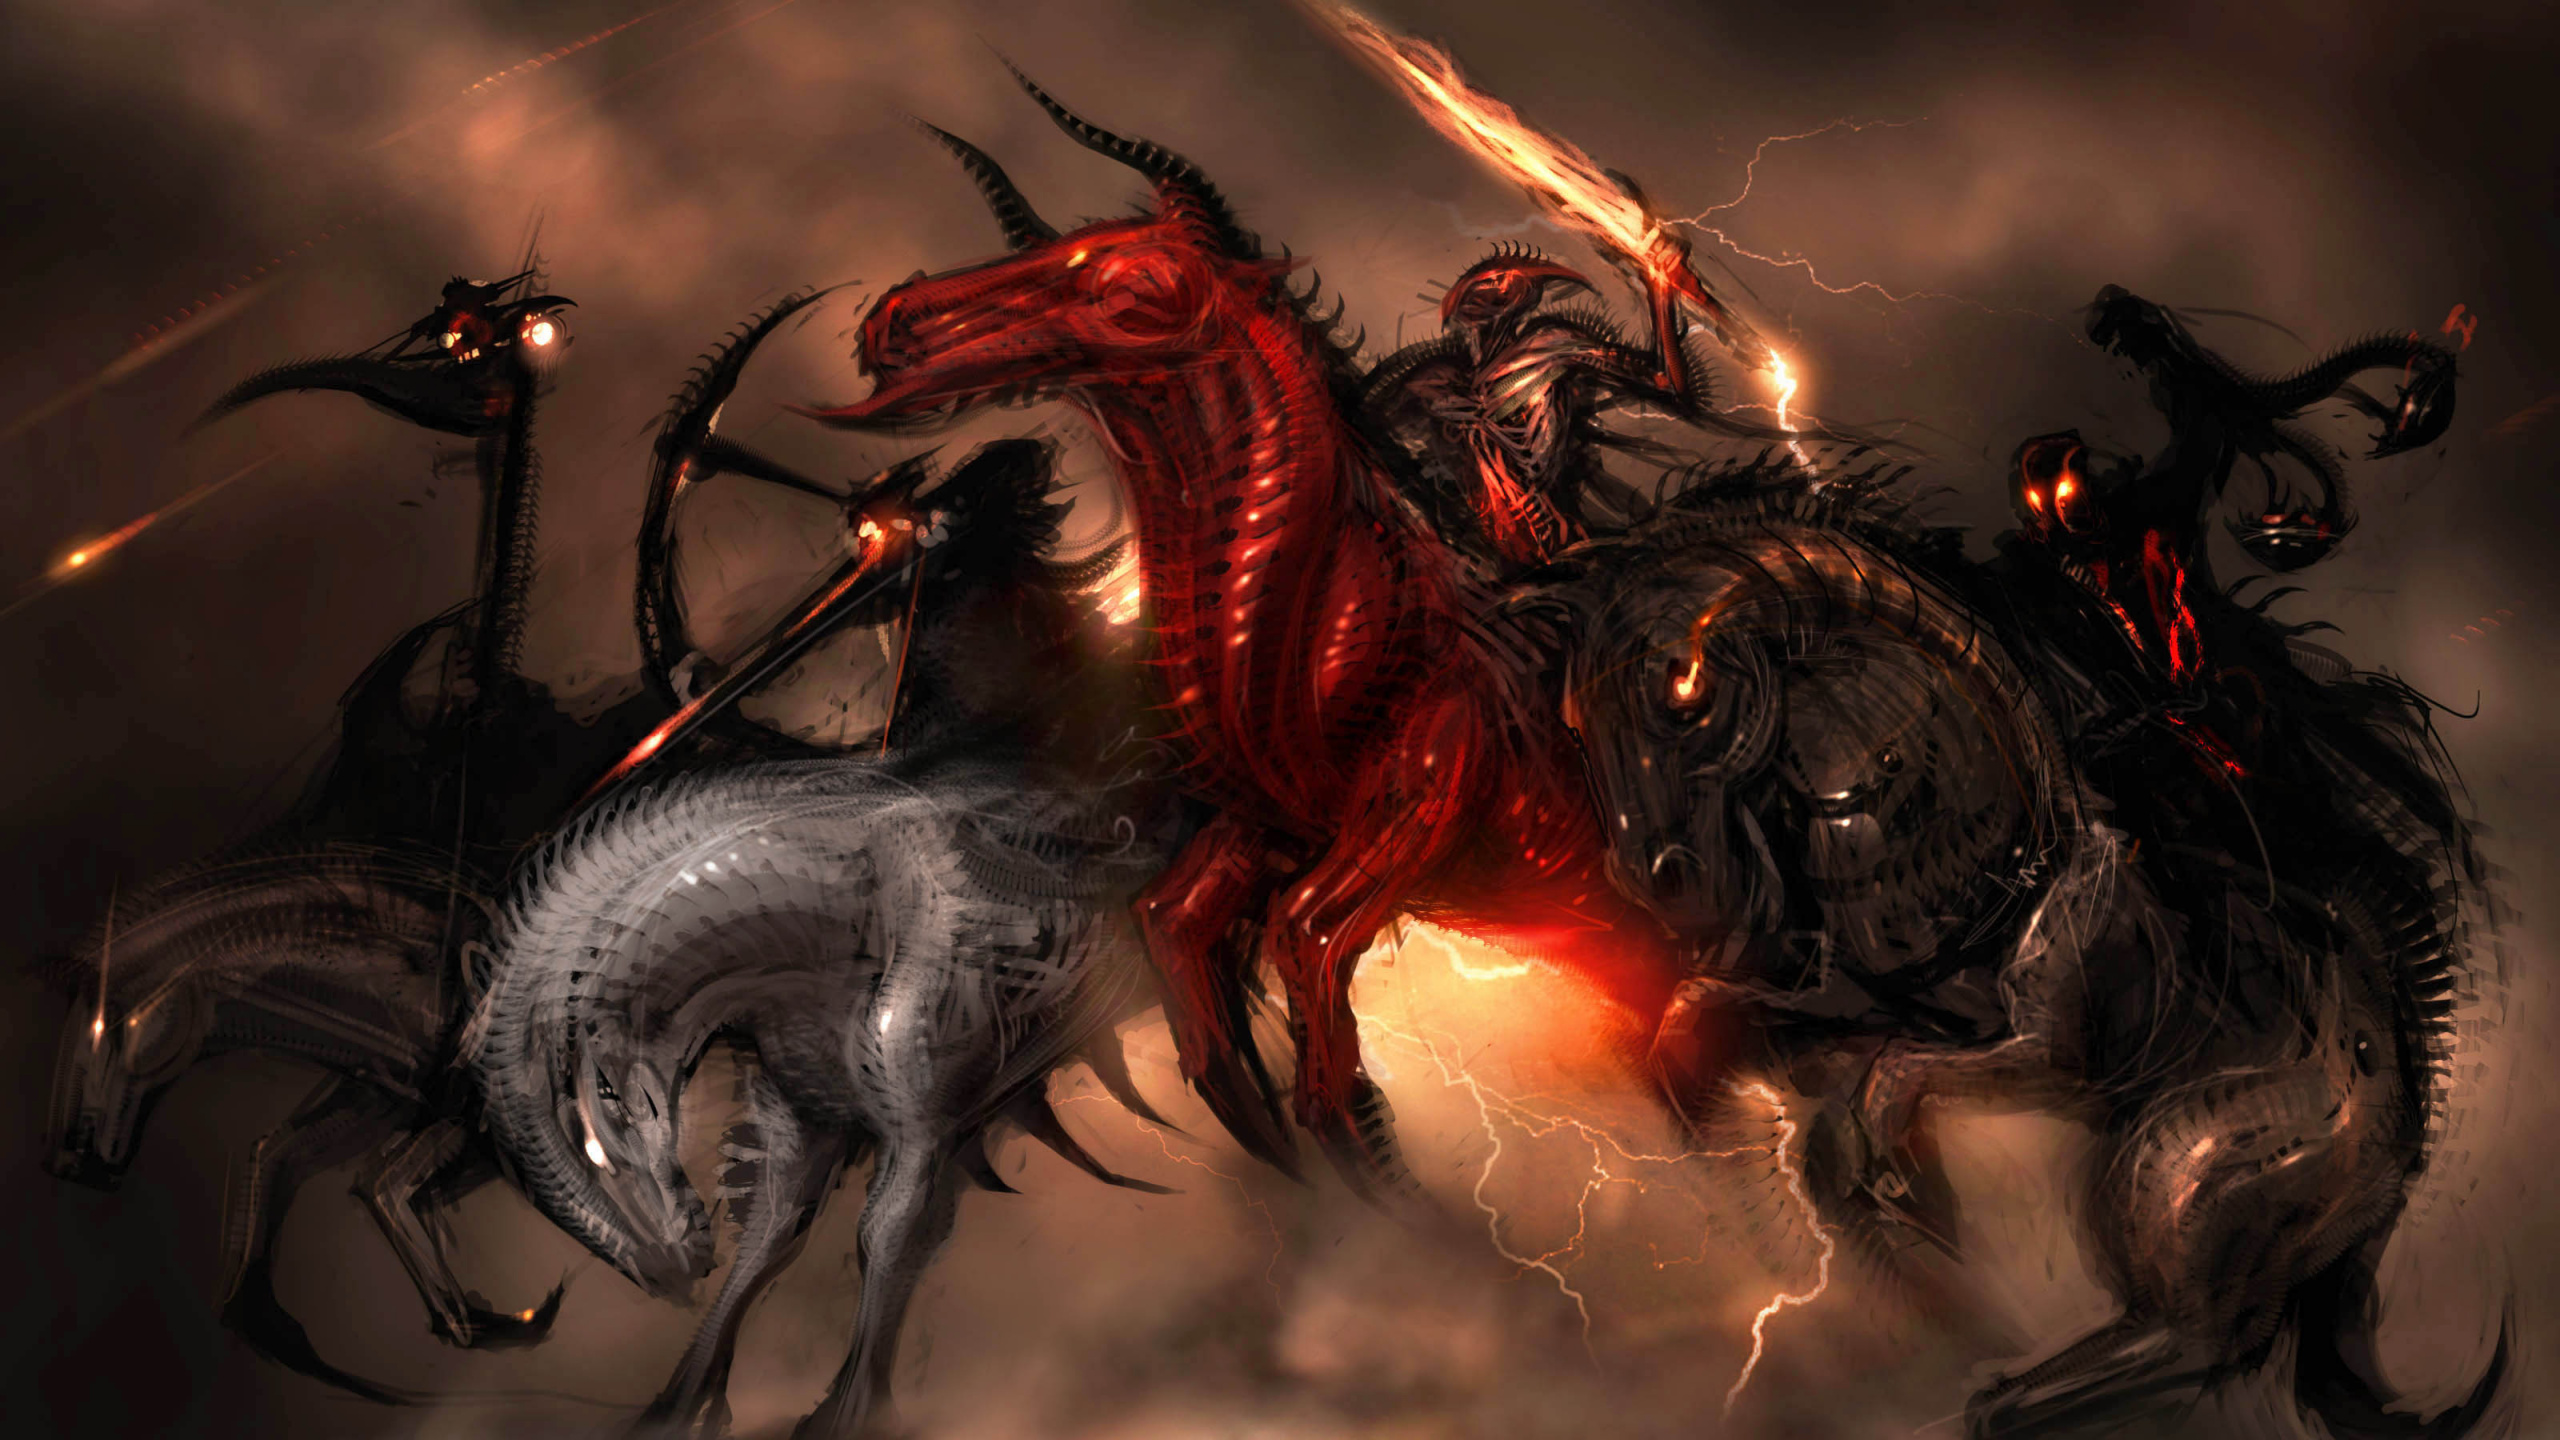 Red and Black Dragon Illustration. Wallpaper in 2560x1440 Resolution